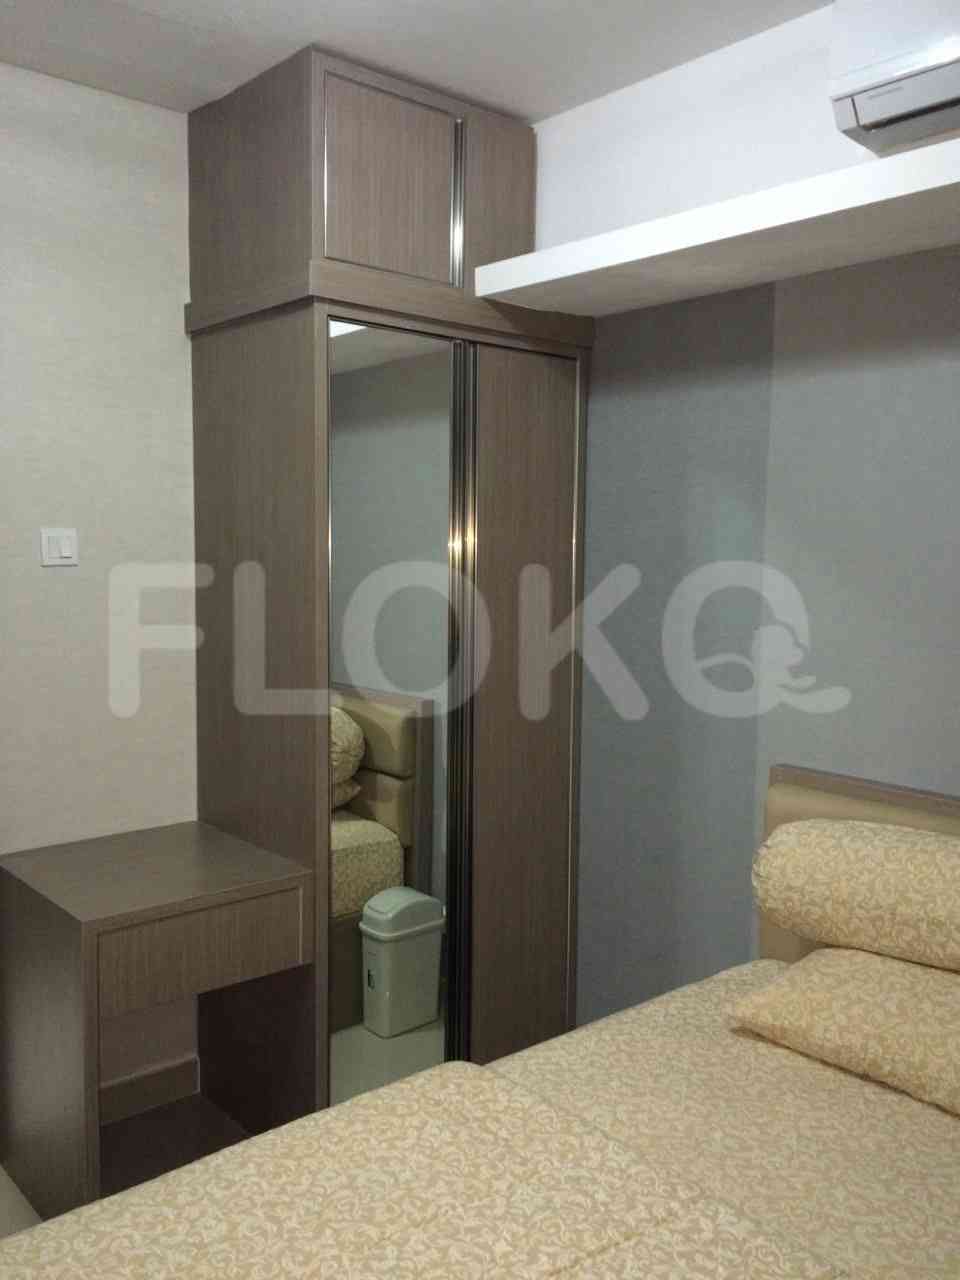 2 Bedroom on 9th Floor for Rent in The Wave Apartment - fku779 7